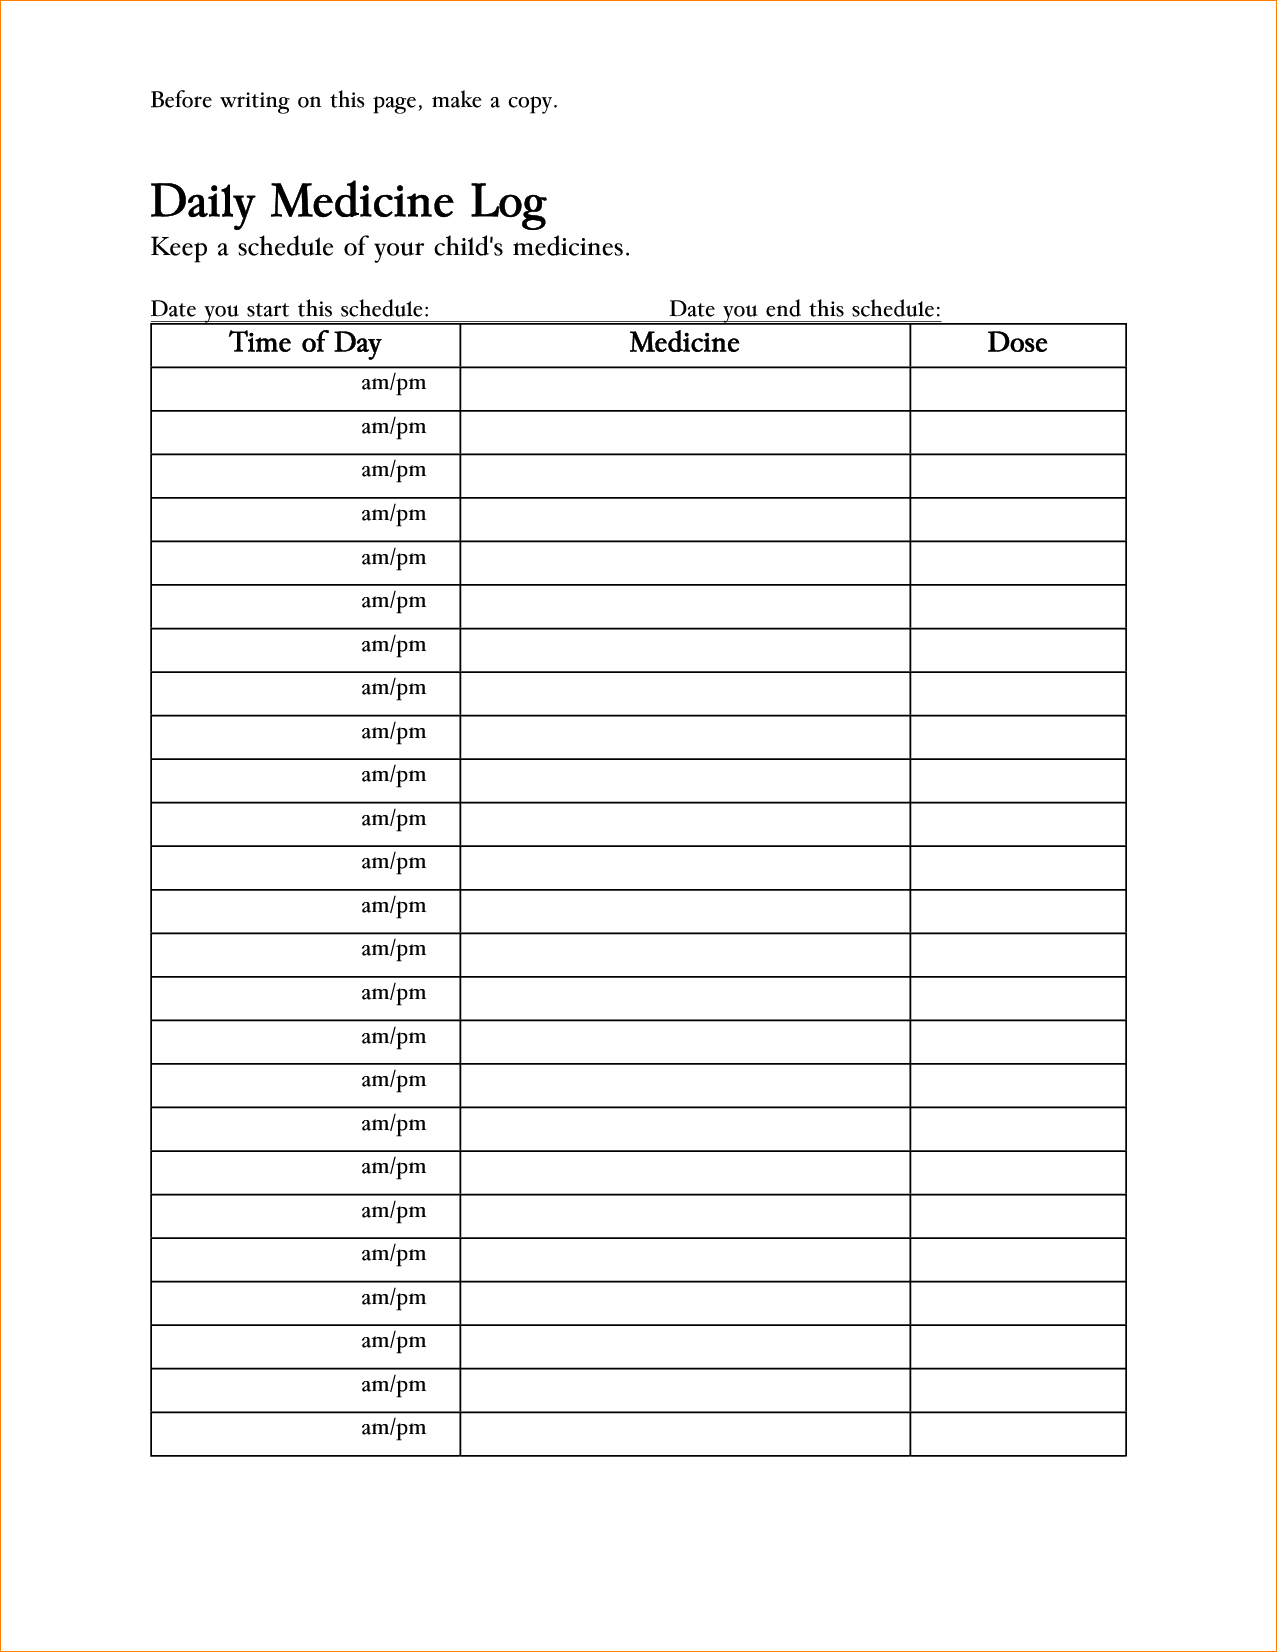 Free Medication Administration Record Template Excel - Yahoo Image - Free Printable Daily Medication Schedule